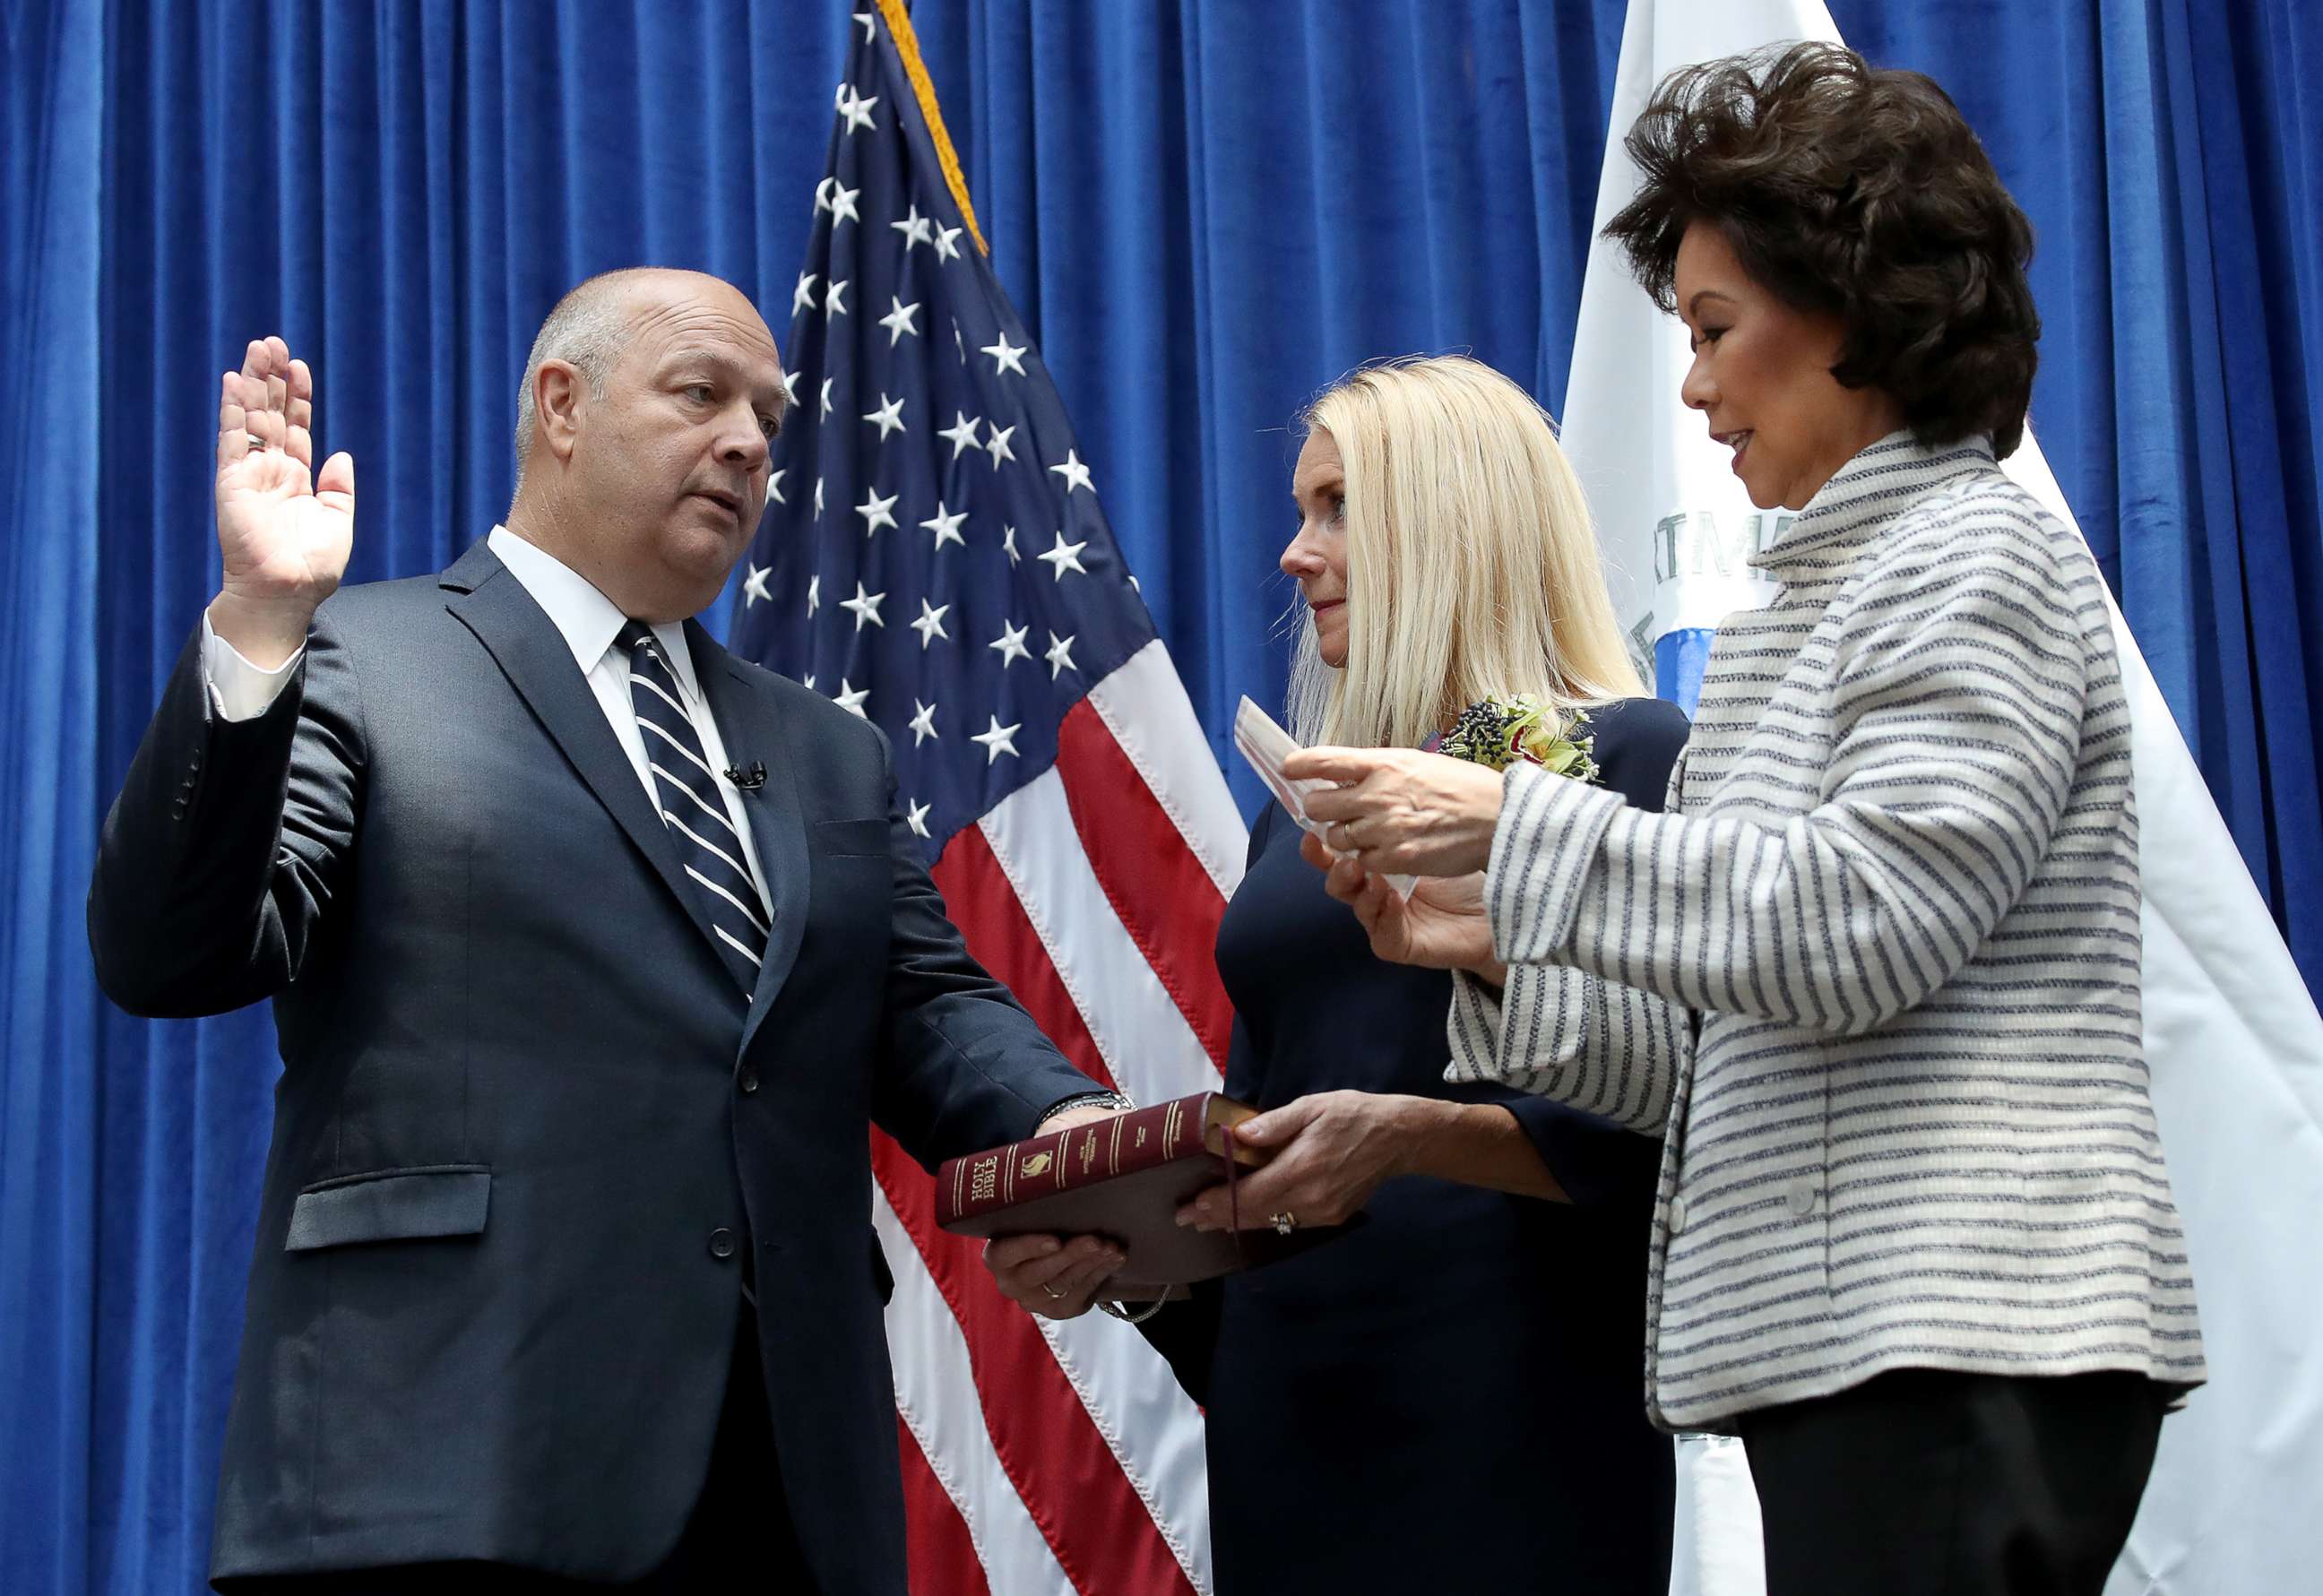 PHOTO: Stephen Dickson is sworn in as FAA administrator by Transportation Secretary Elaine Chao during a ceremony at the Department of Transportation August 12, 2019, in Washington, D.C.